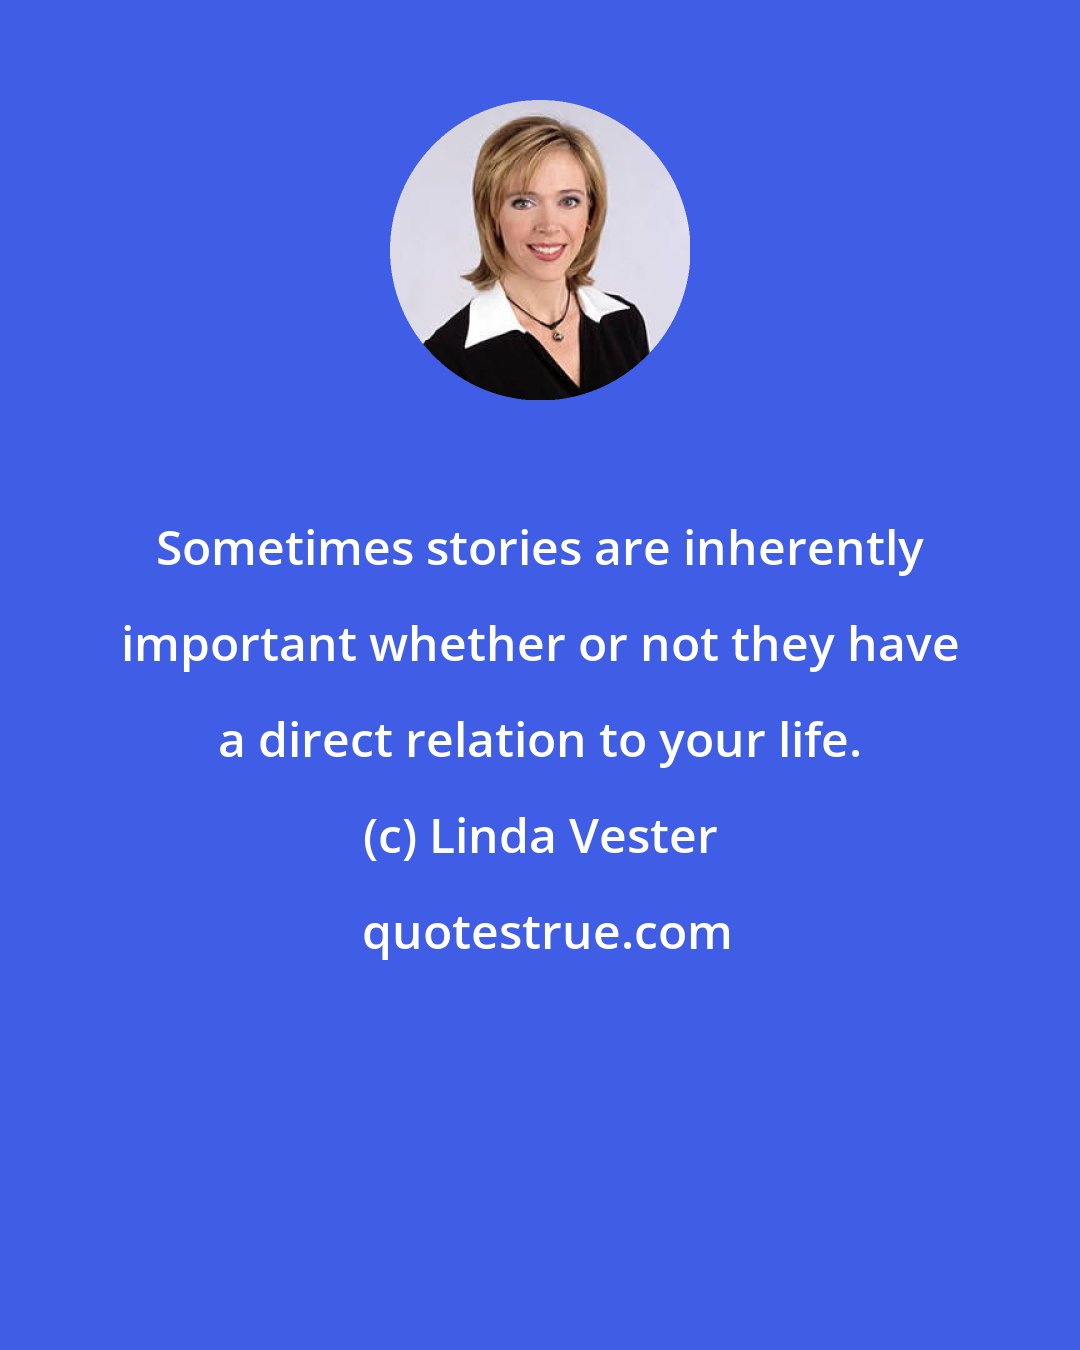 Linda Vester: Sometimes stories are inherently important whether or not they have a direct relation to your life.